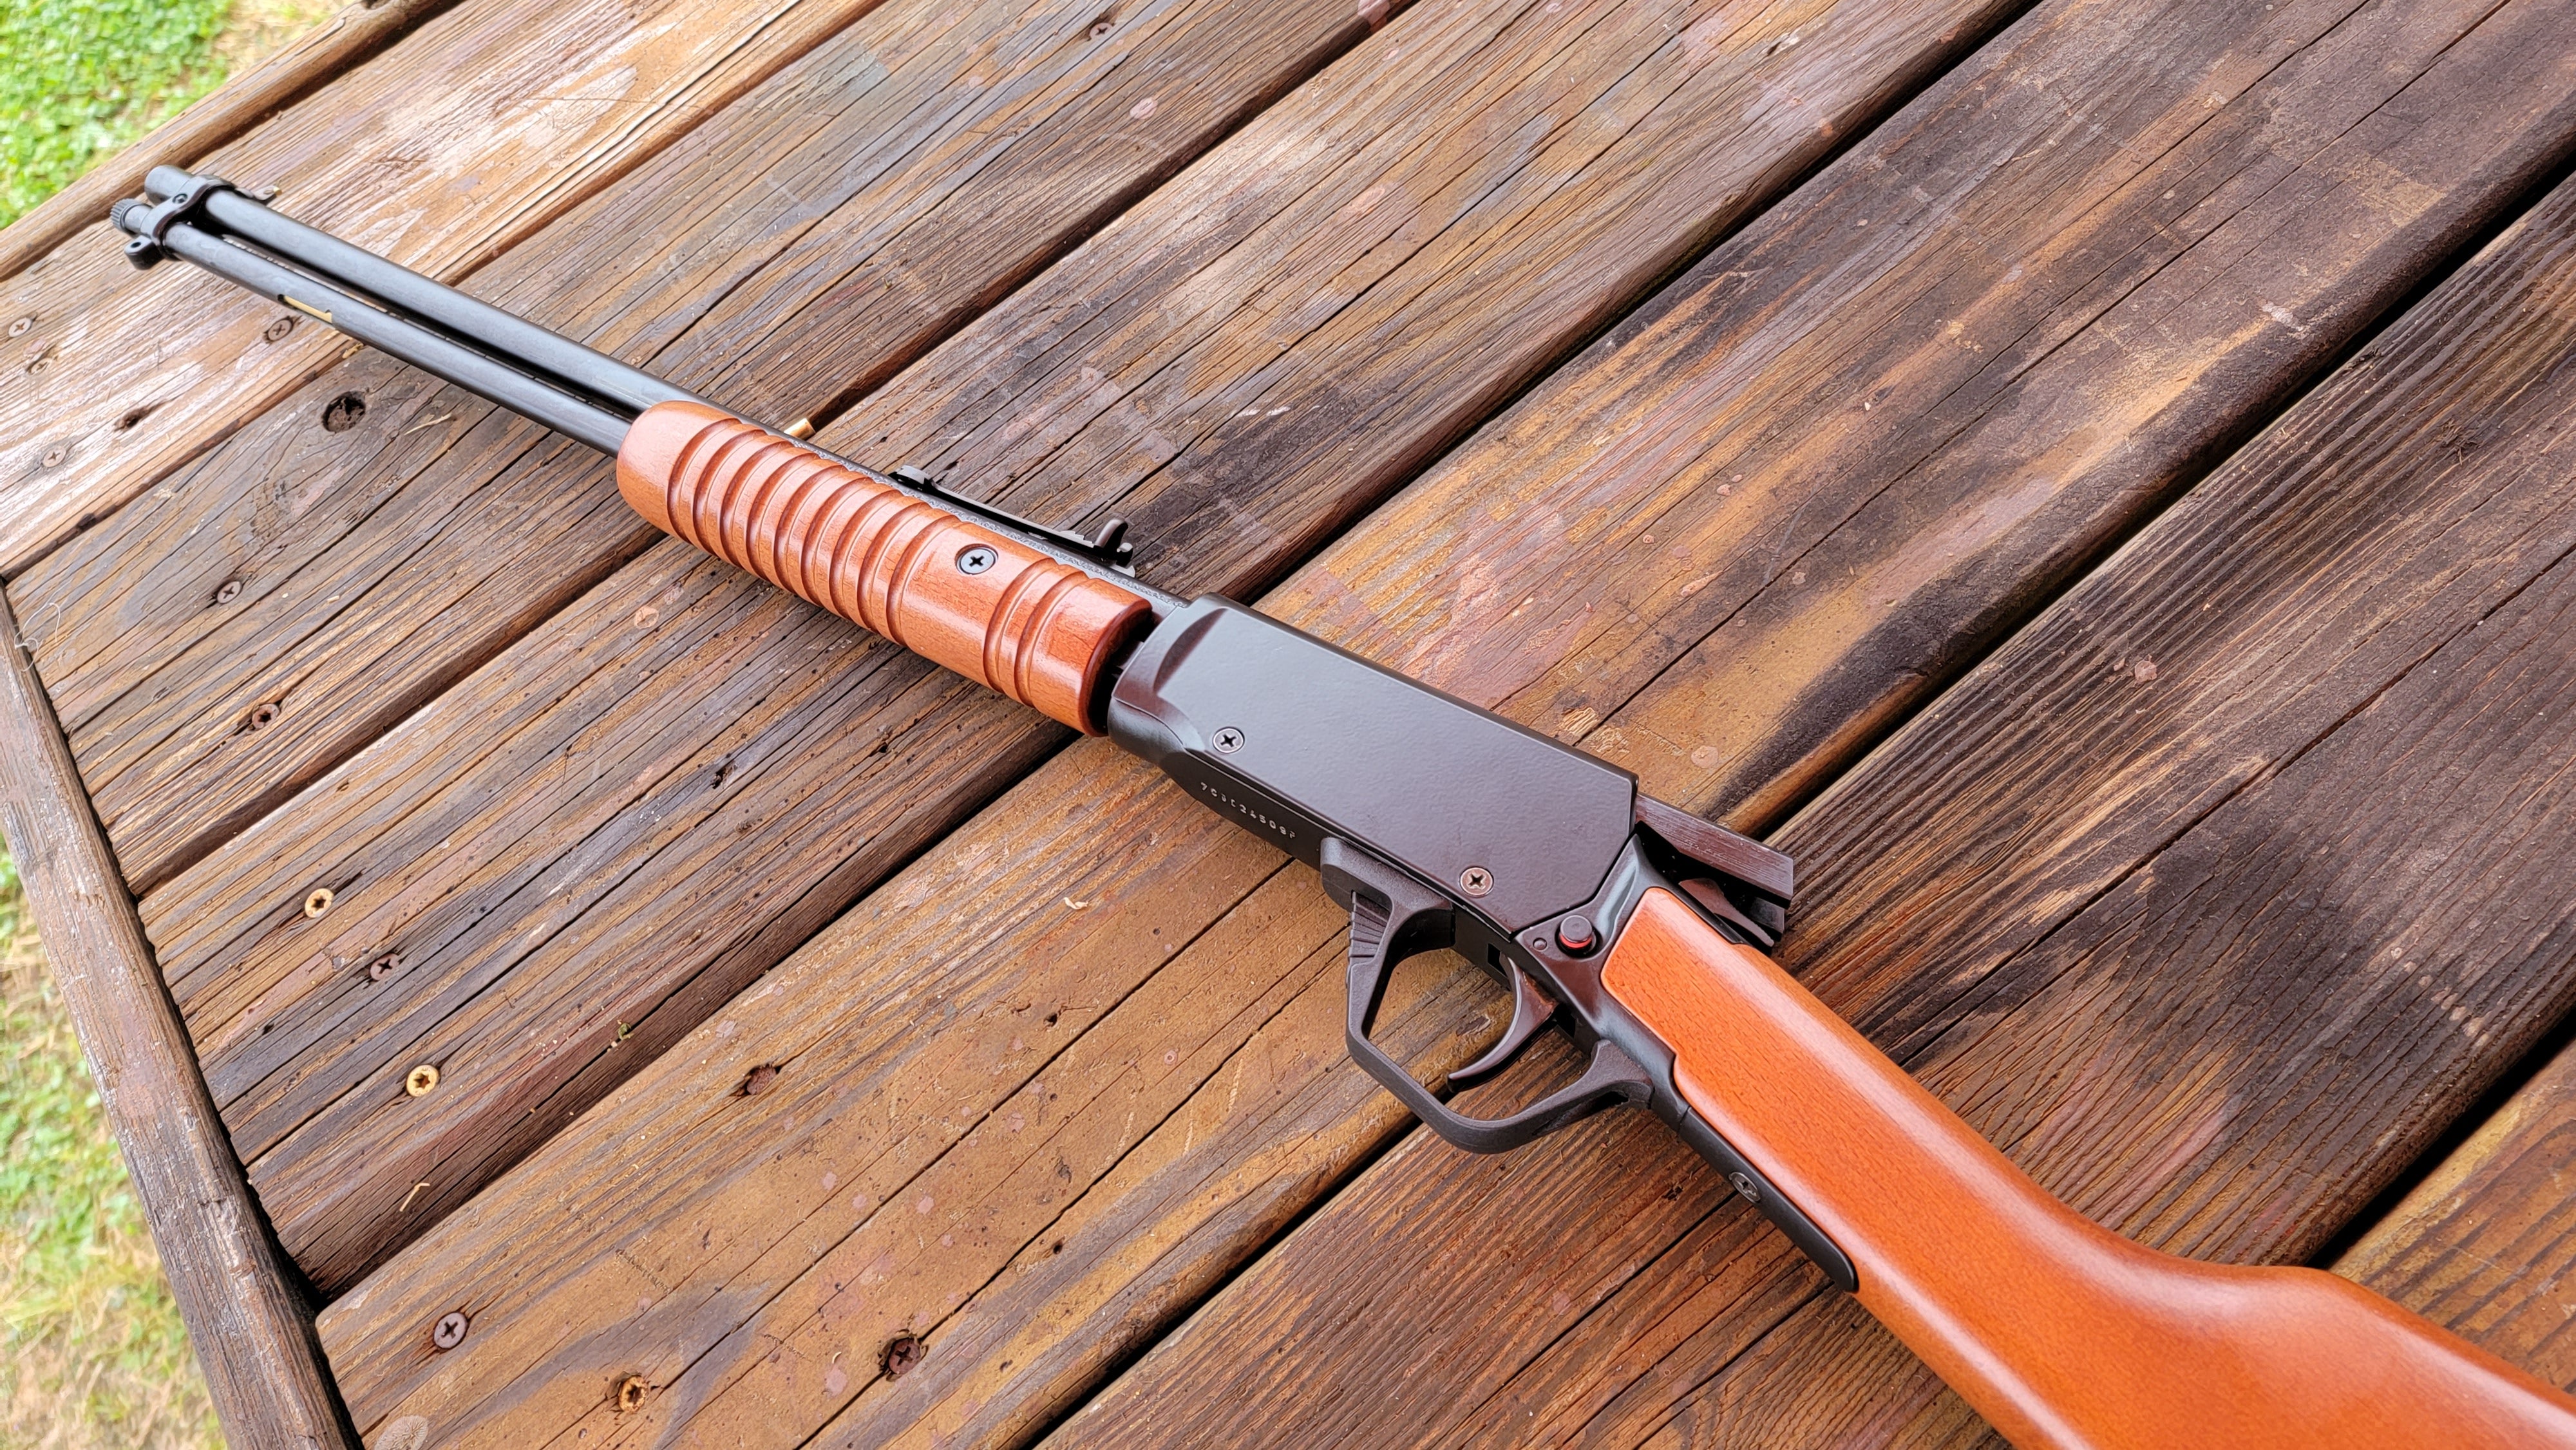 Pump Action Rimfire Rifle - The 15-Shot Rossi Gallery 22 